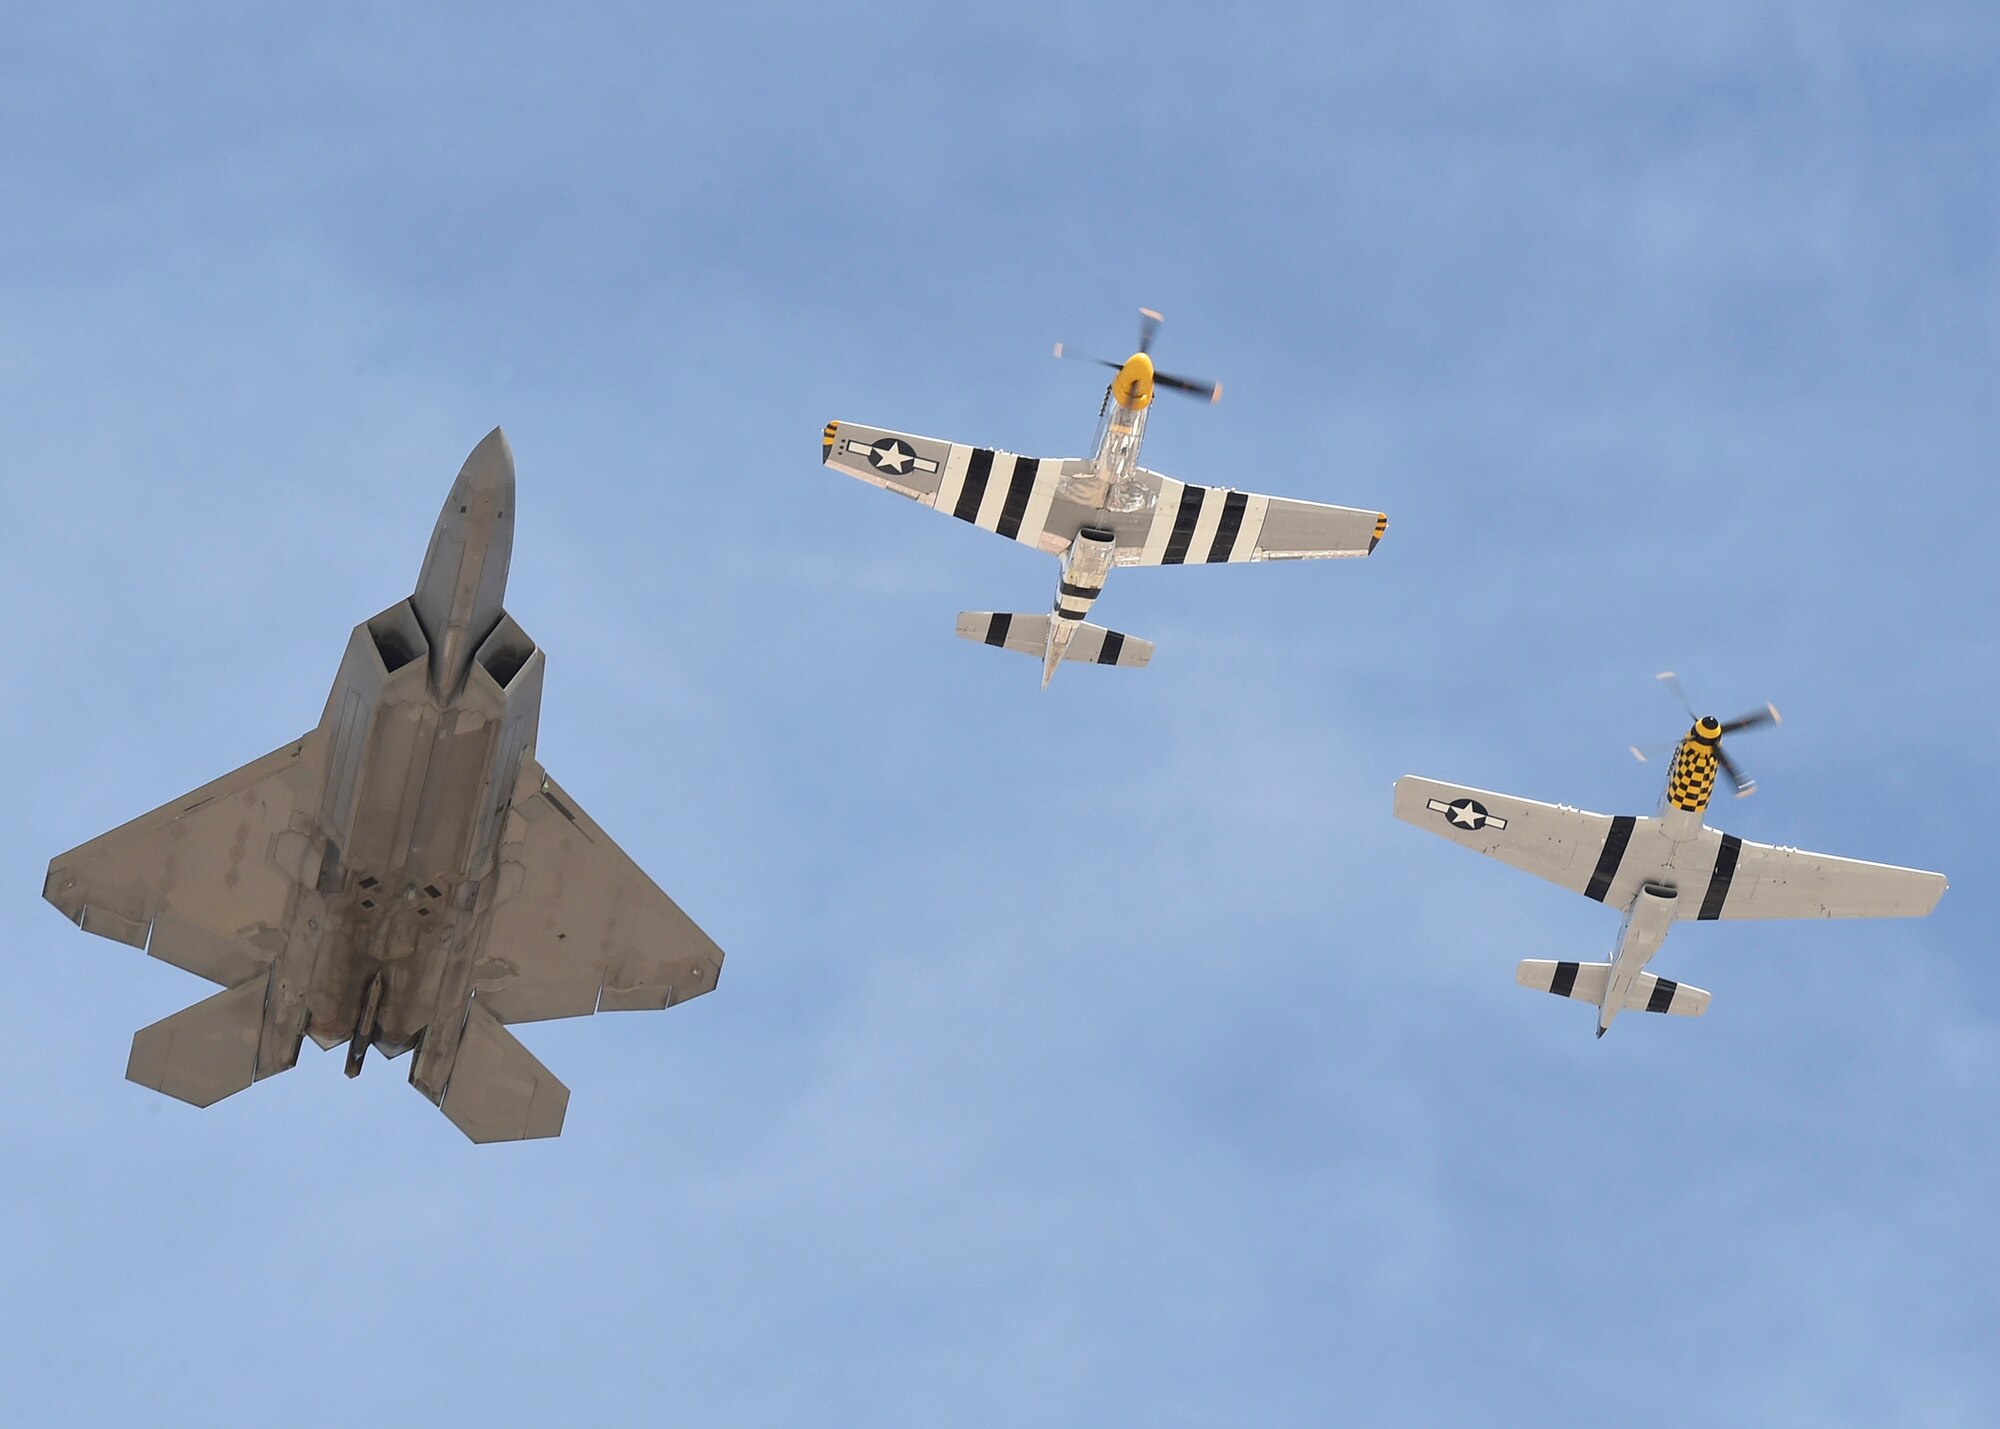 An F-22 Raptor and two P-51 Mustangs fly in formation during the Heritage Flight Training and Certification Course Feb. 9, 2017, at Davis-Monthan Air Force Base, Ariz. Heritage and demonstration teams need to be certified annually to participate in open houses and air shows worldwide. (U.S. Air Force photo by Senior Airman James Hensley)